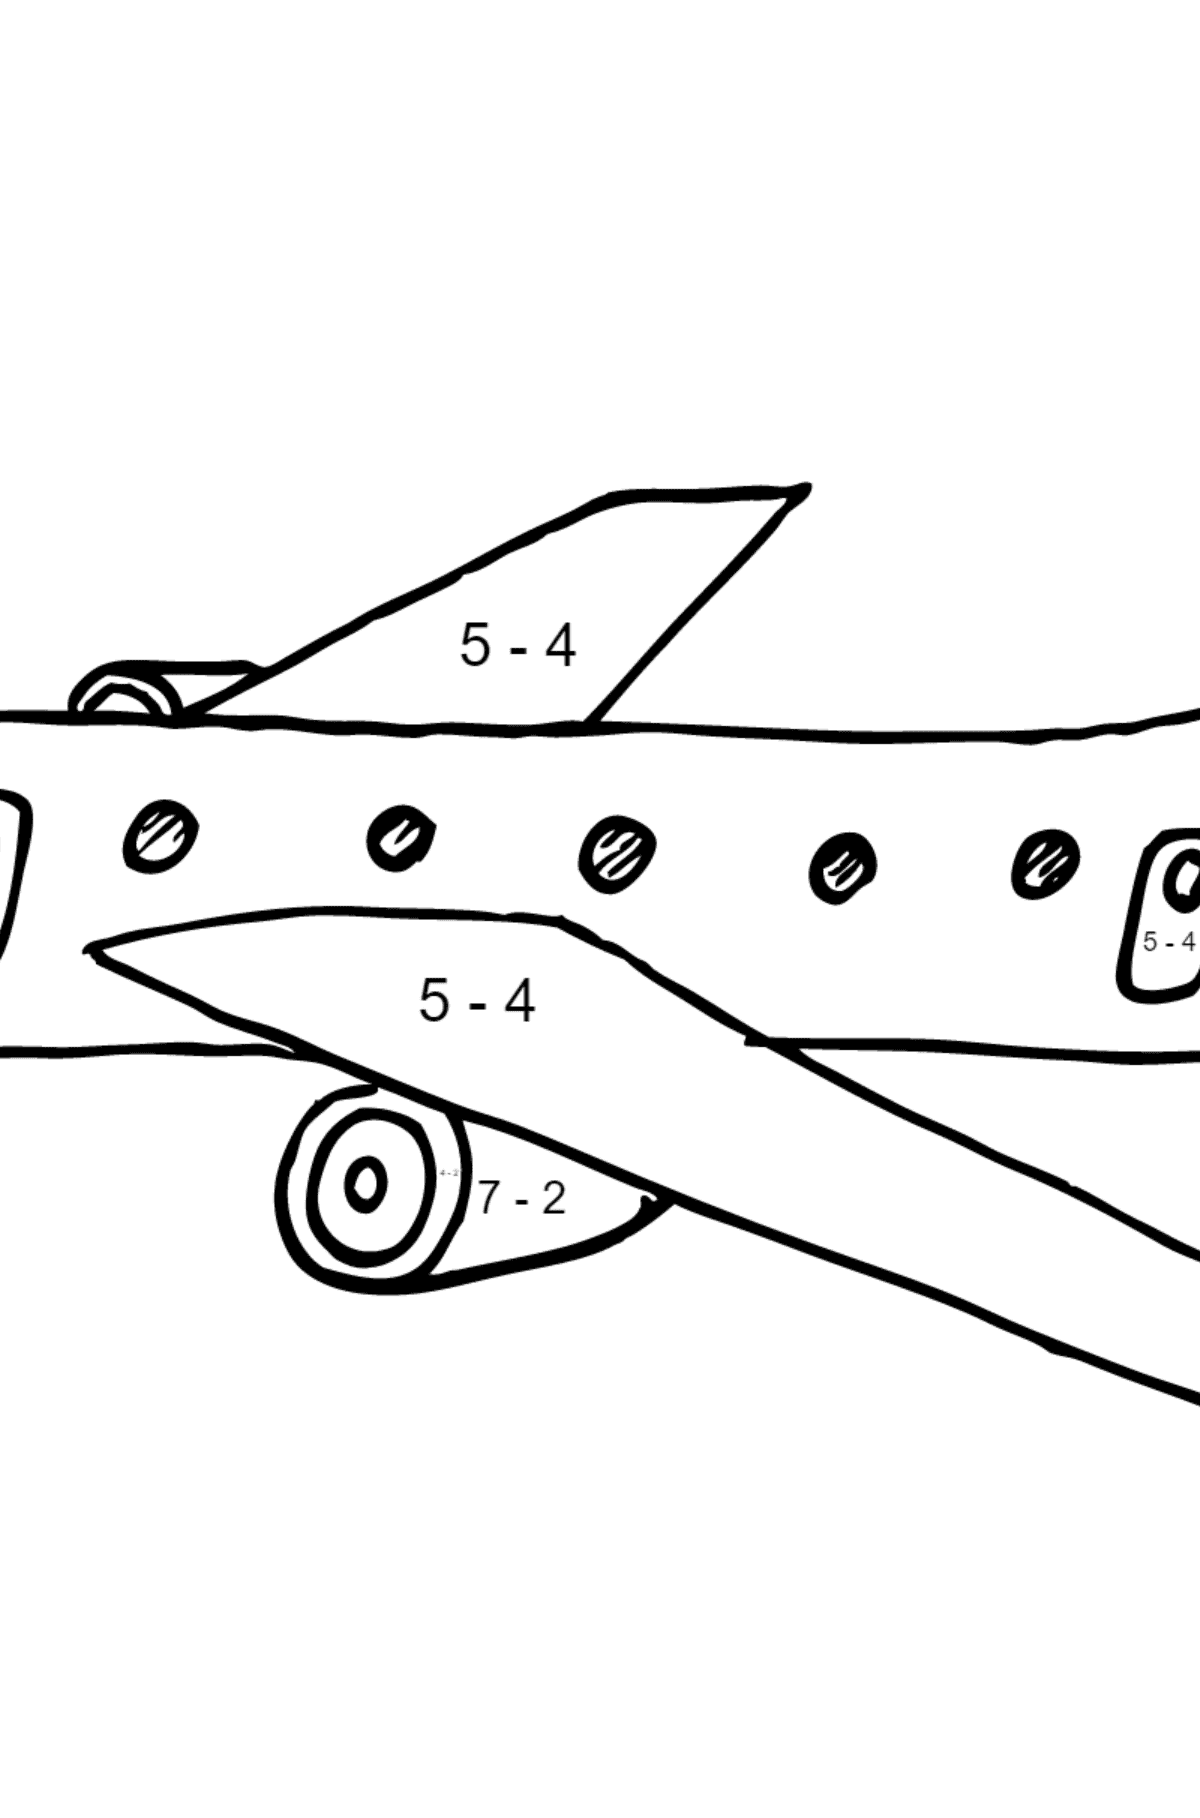 Coloring Page - A Commercial Jet - Math Coloring - Subtraction for Kids